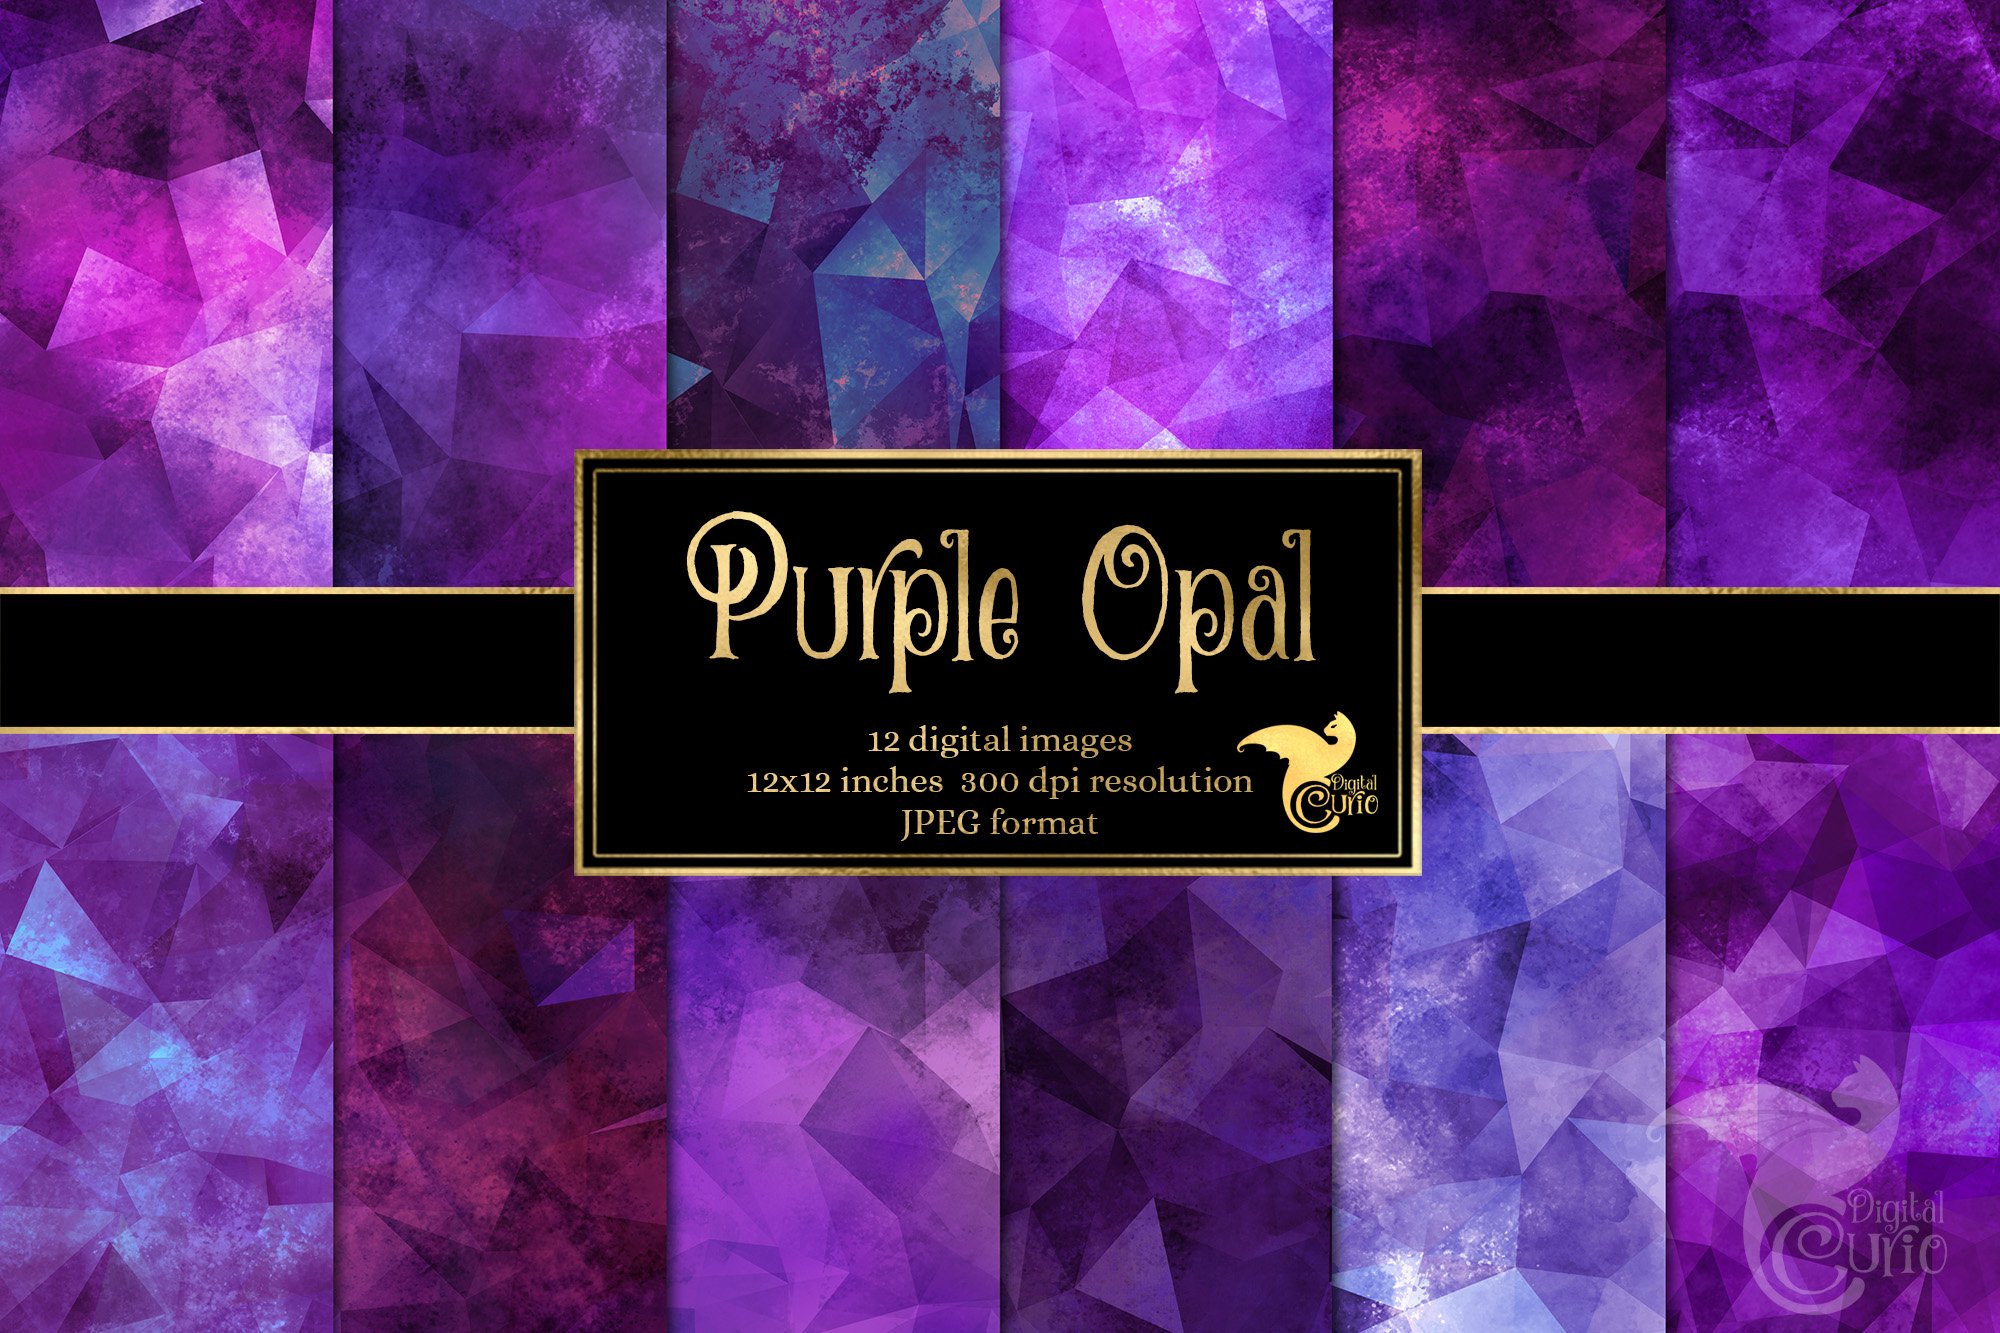 Purple Opal Textures cover image.